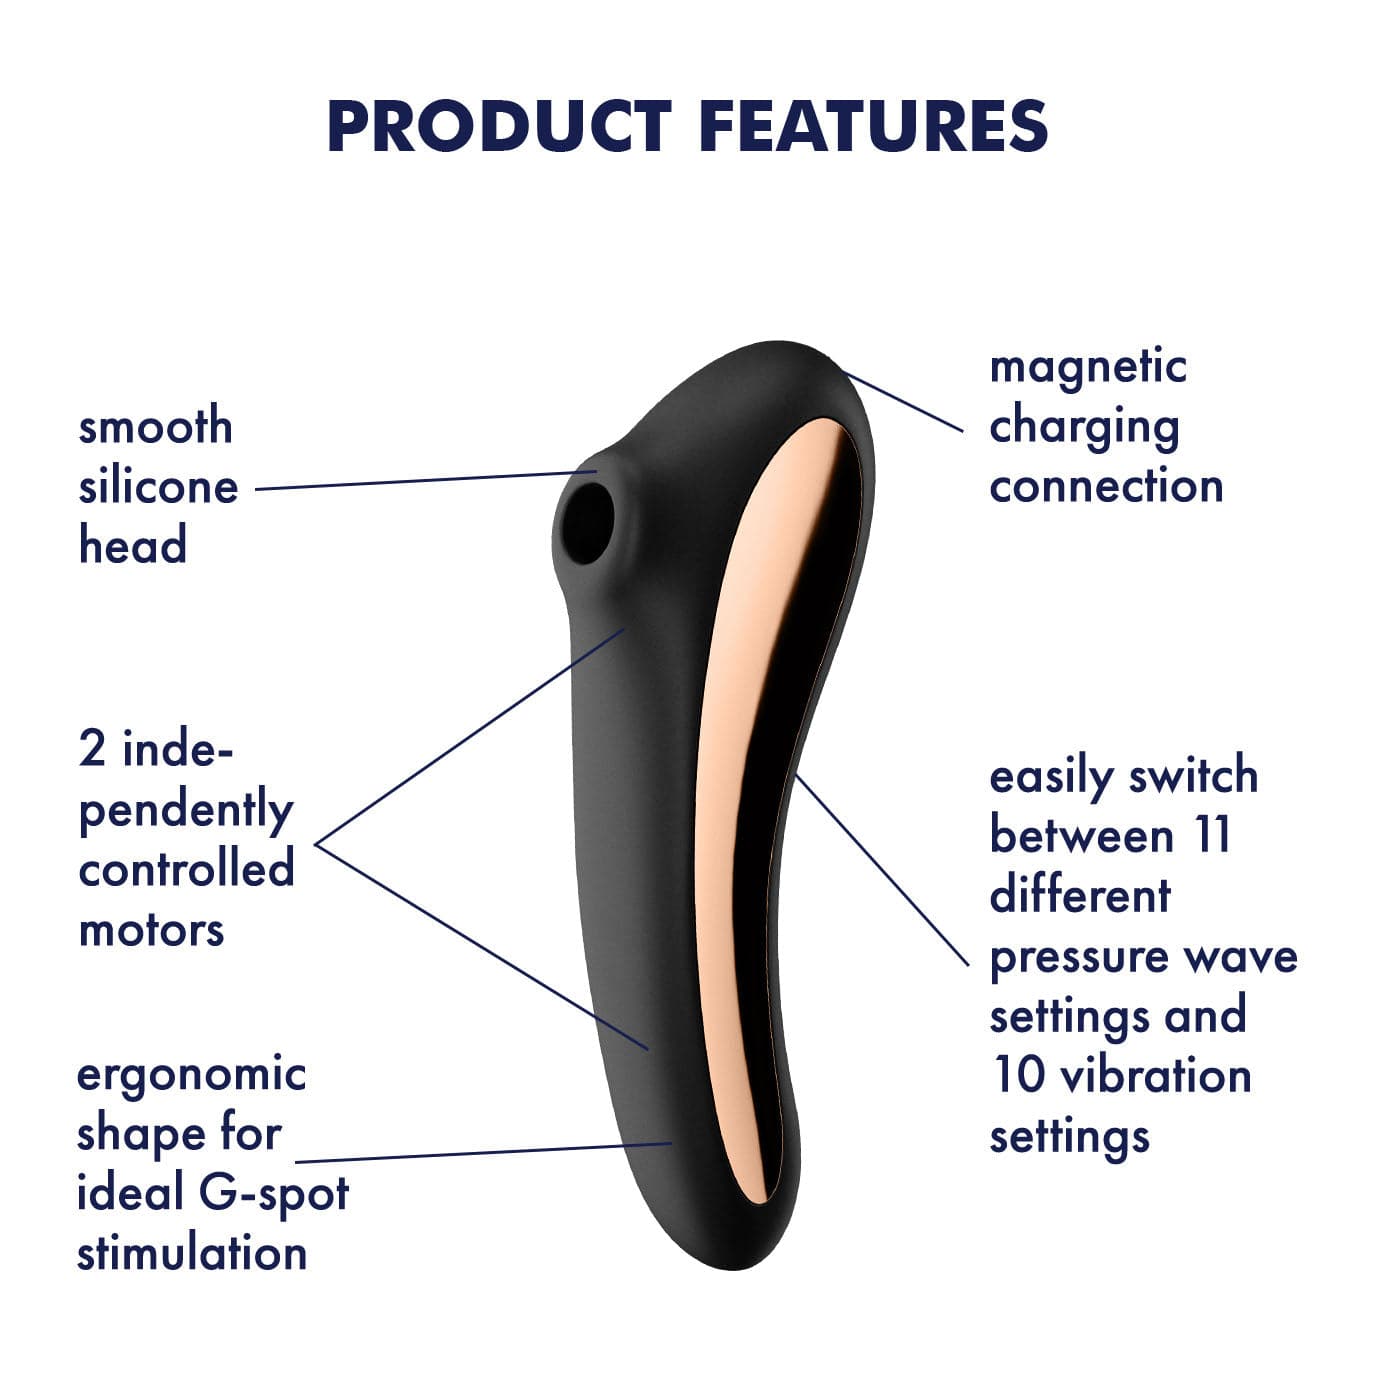 Satisfyer - Dual Kiss Insertable Air Pulse Vibrator w App-Controlled Clitoral Air Stimulator (Black) Clit Massager (Vibration) Rechargeable 4061504003009 CherryAffairs